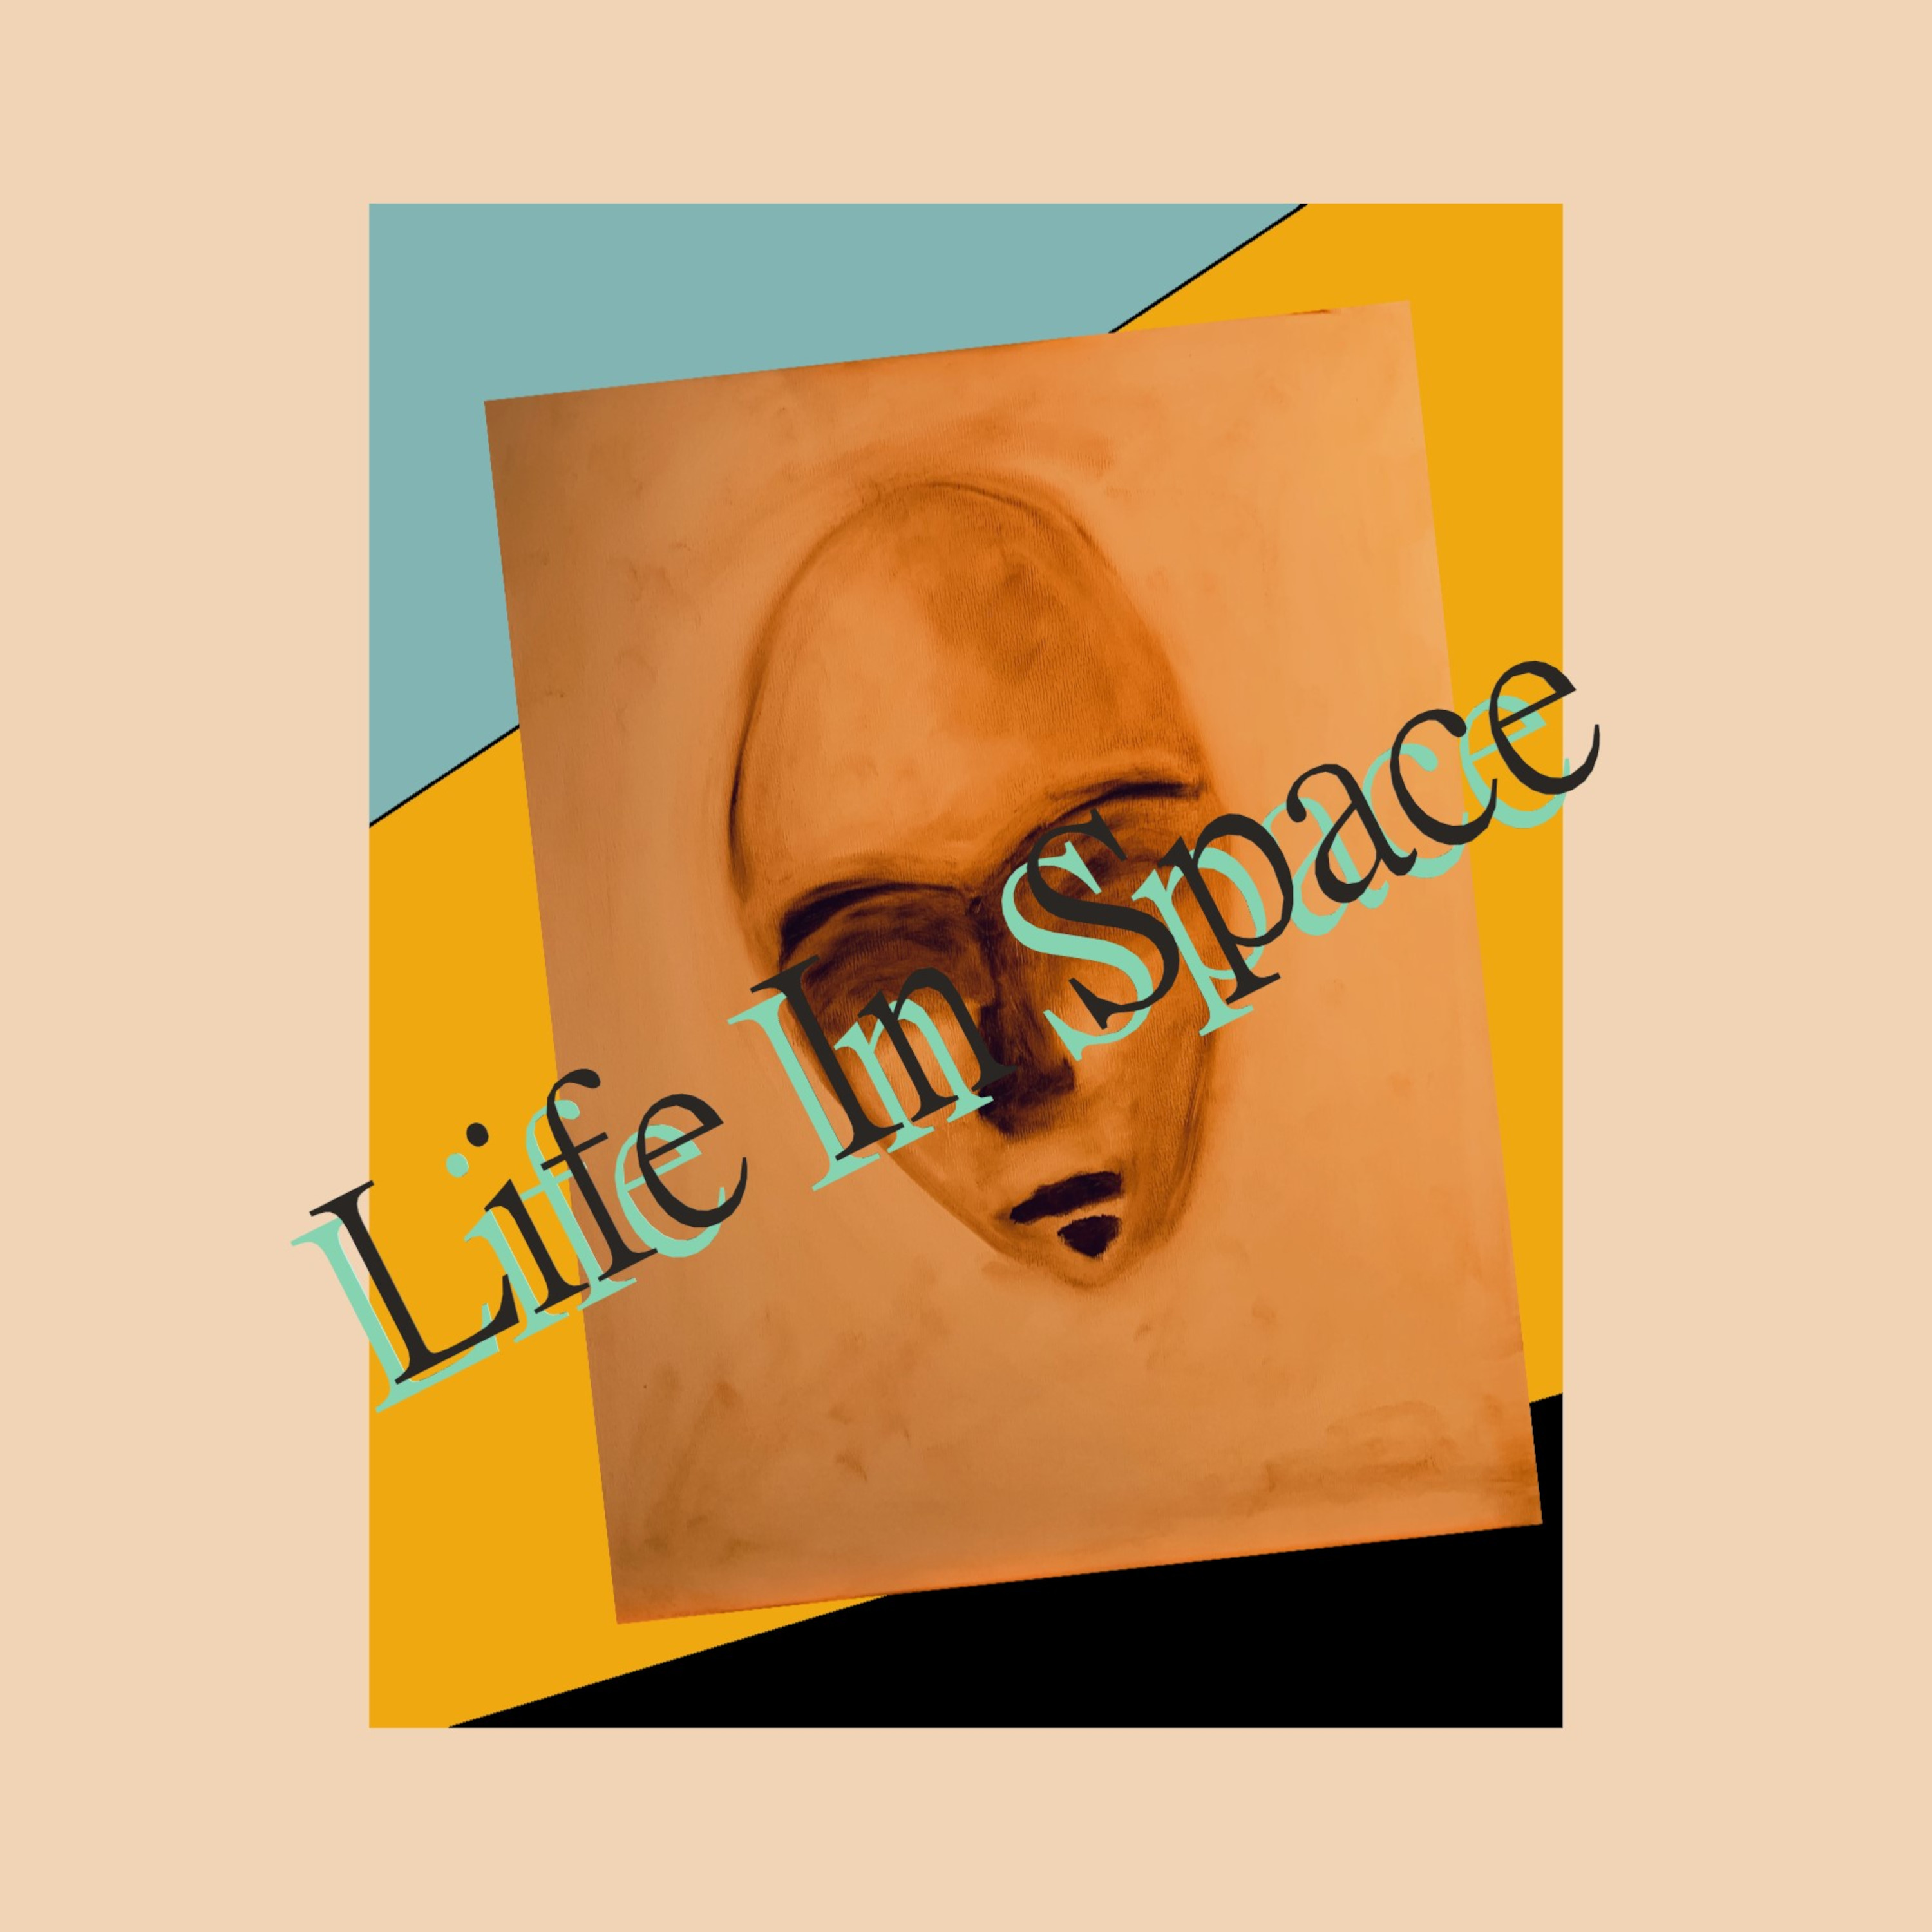 AudiosErgeon "Life In Space"